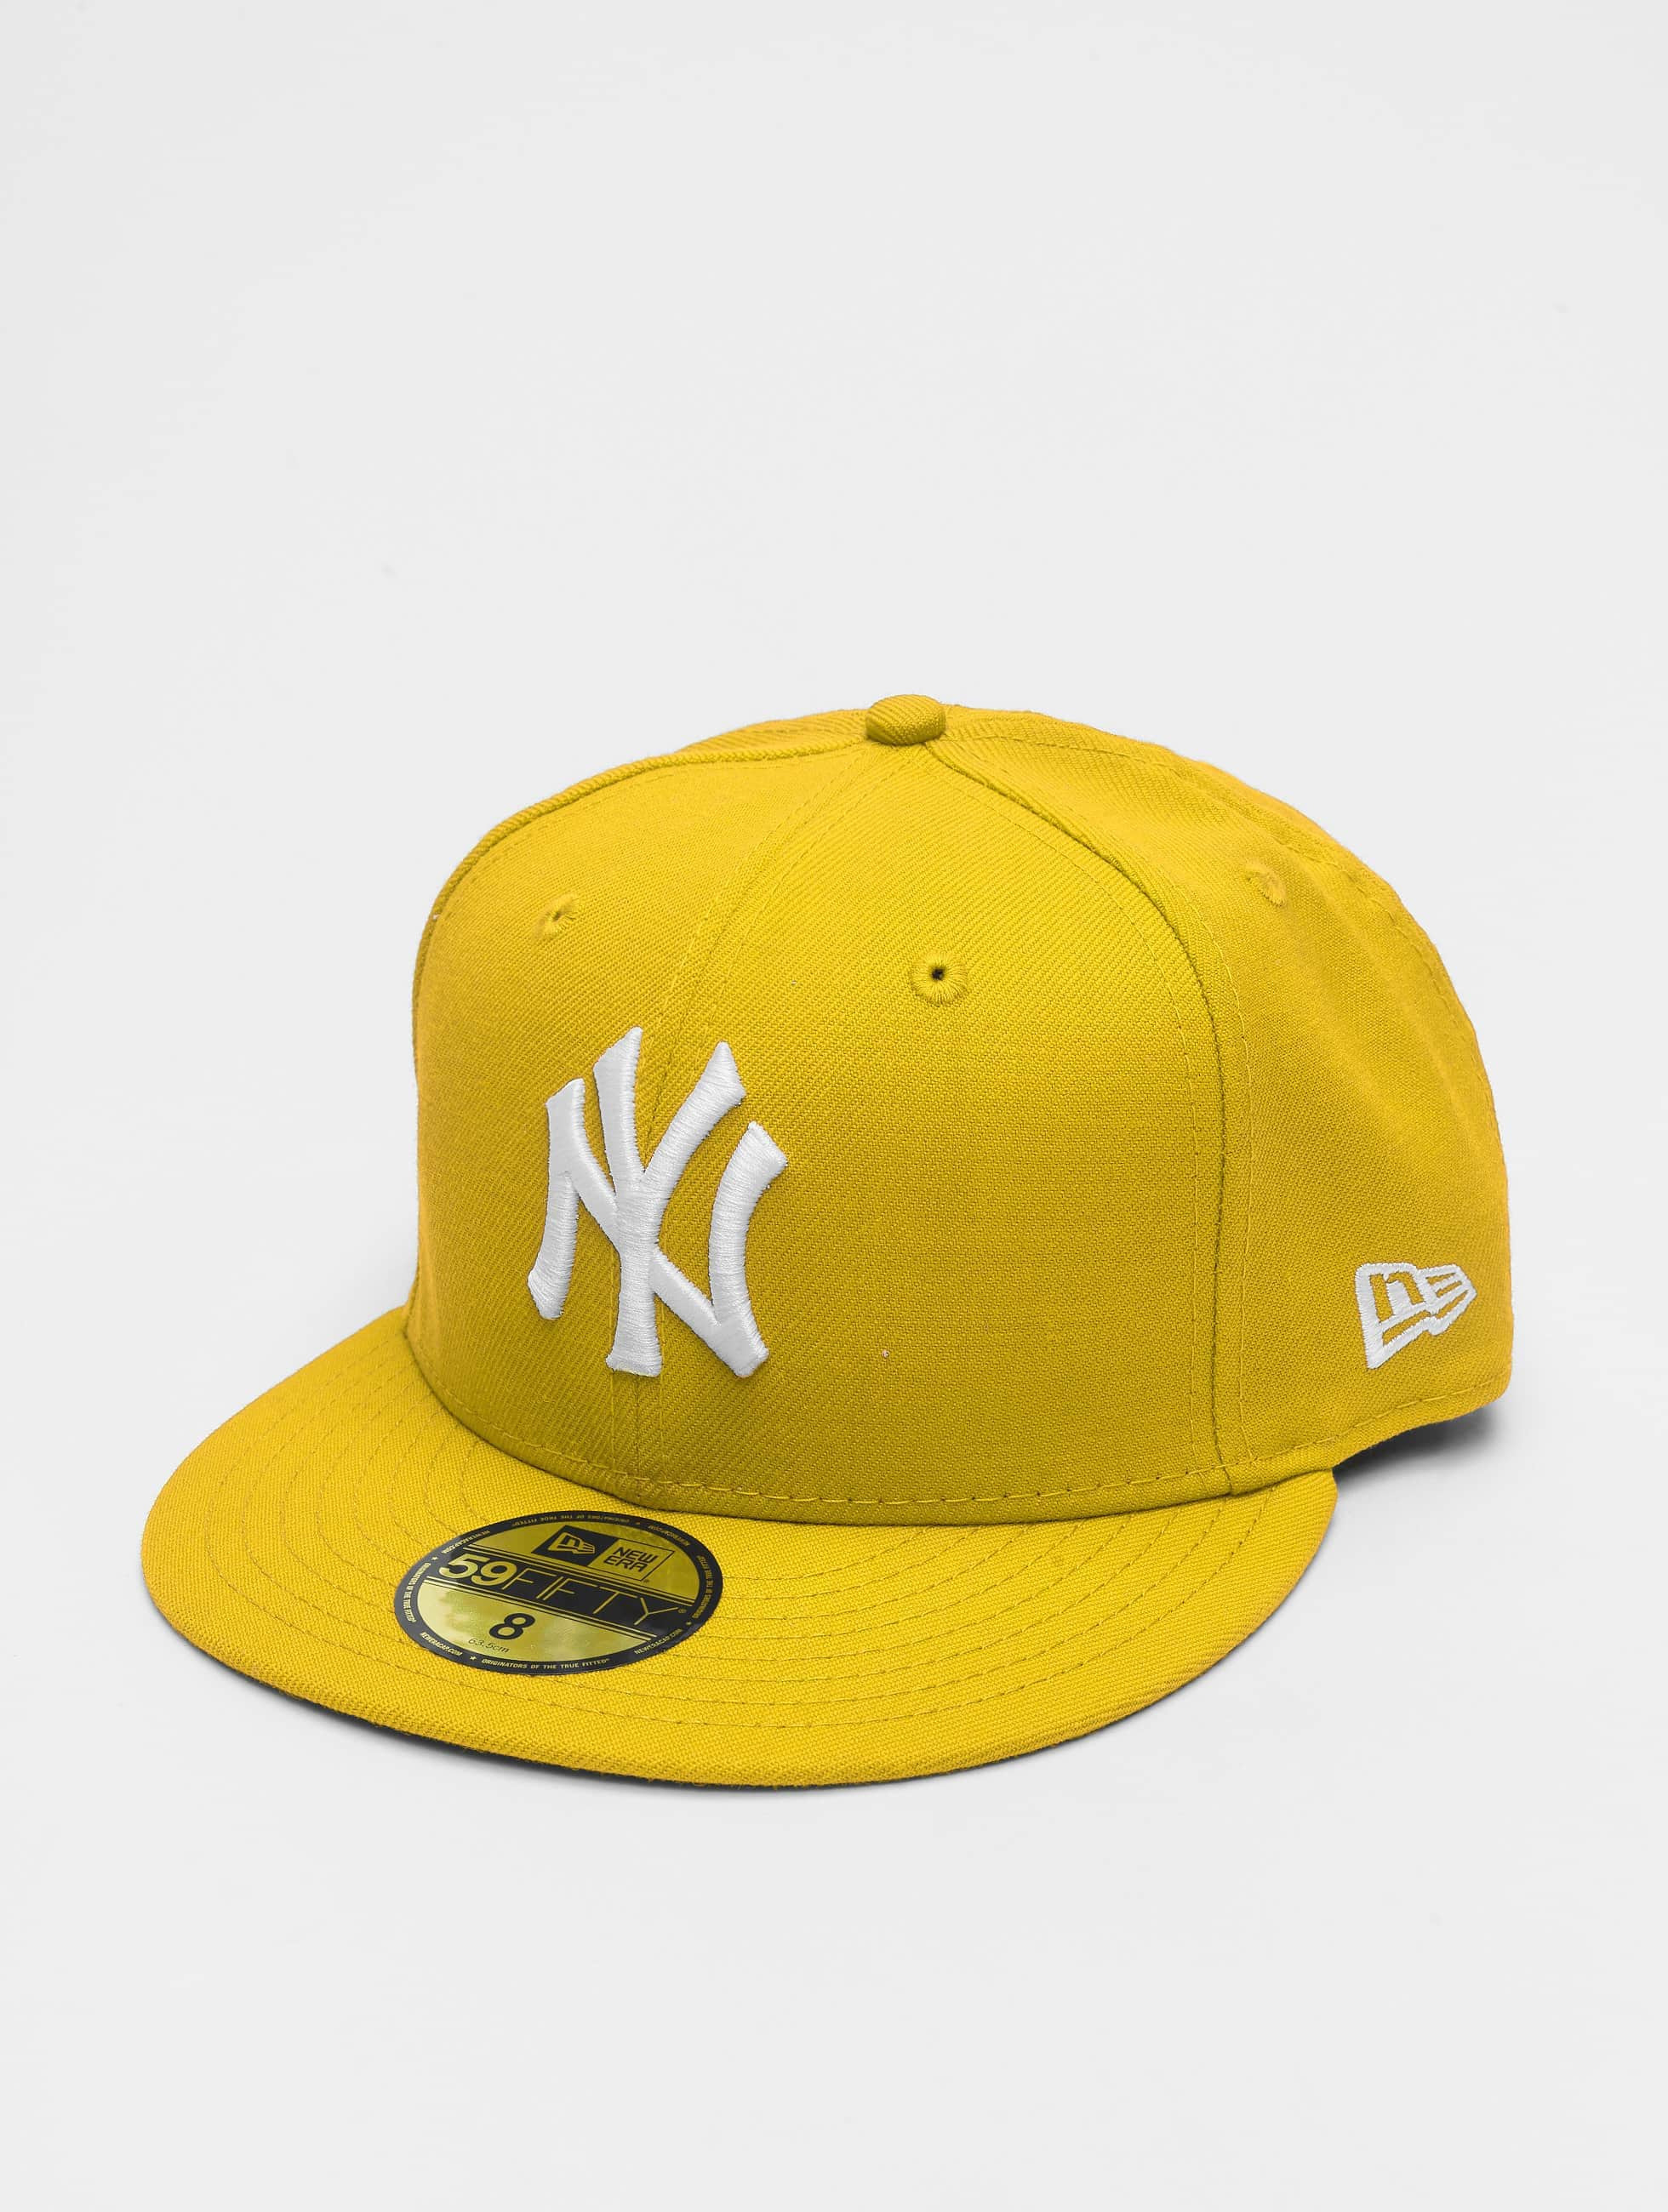 Casquette / Fitted MLB Basic NY Yankees 59Fifty en jaune